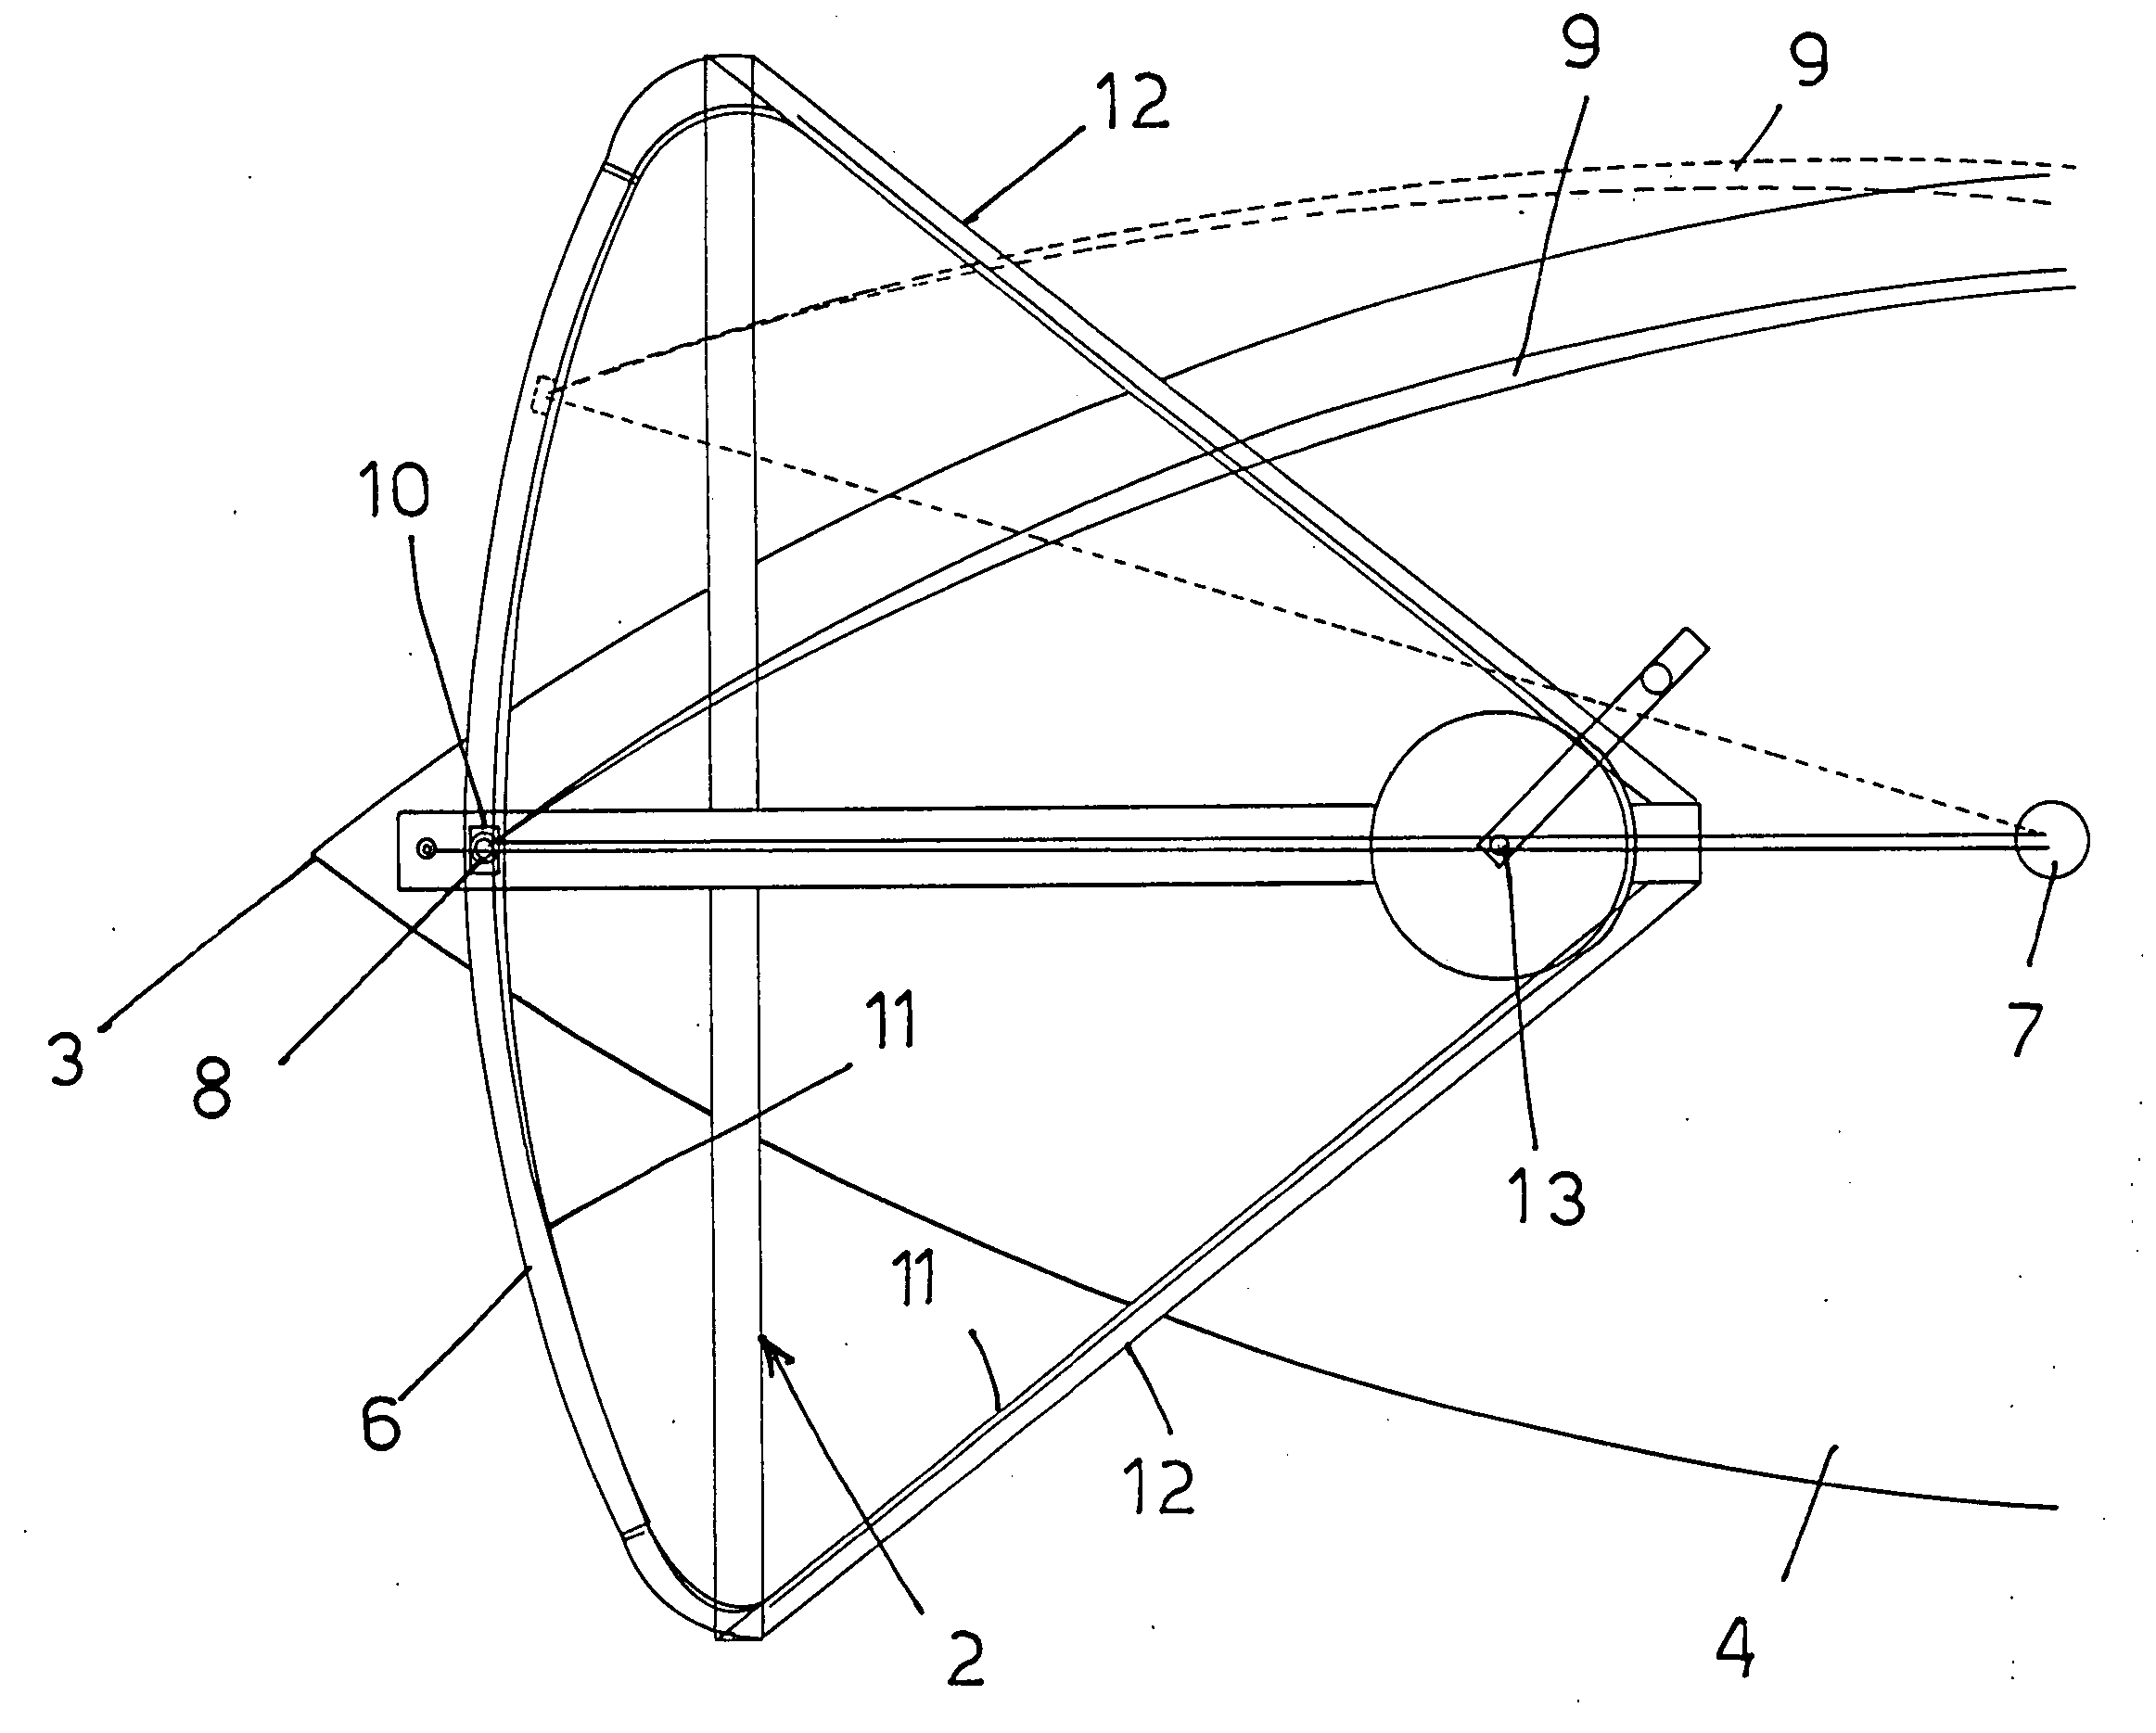 Nautical device for adjusting the bow sail of a sail boat